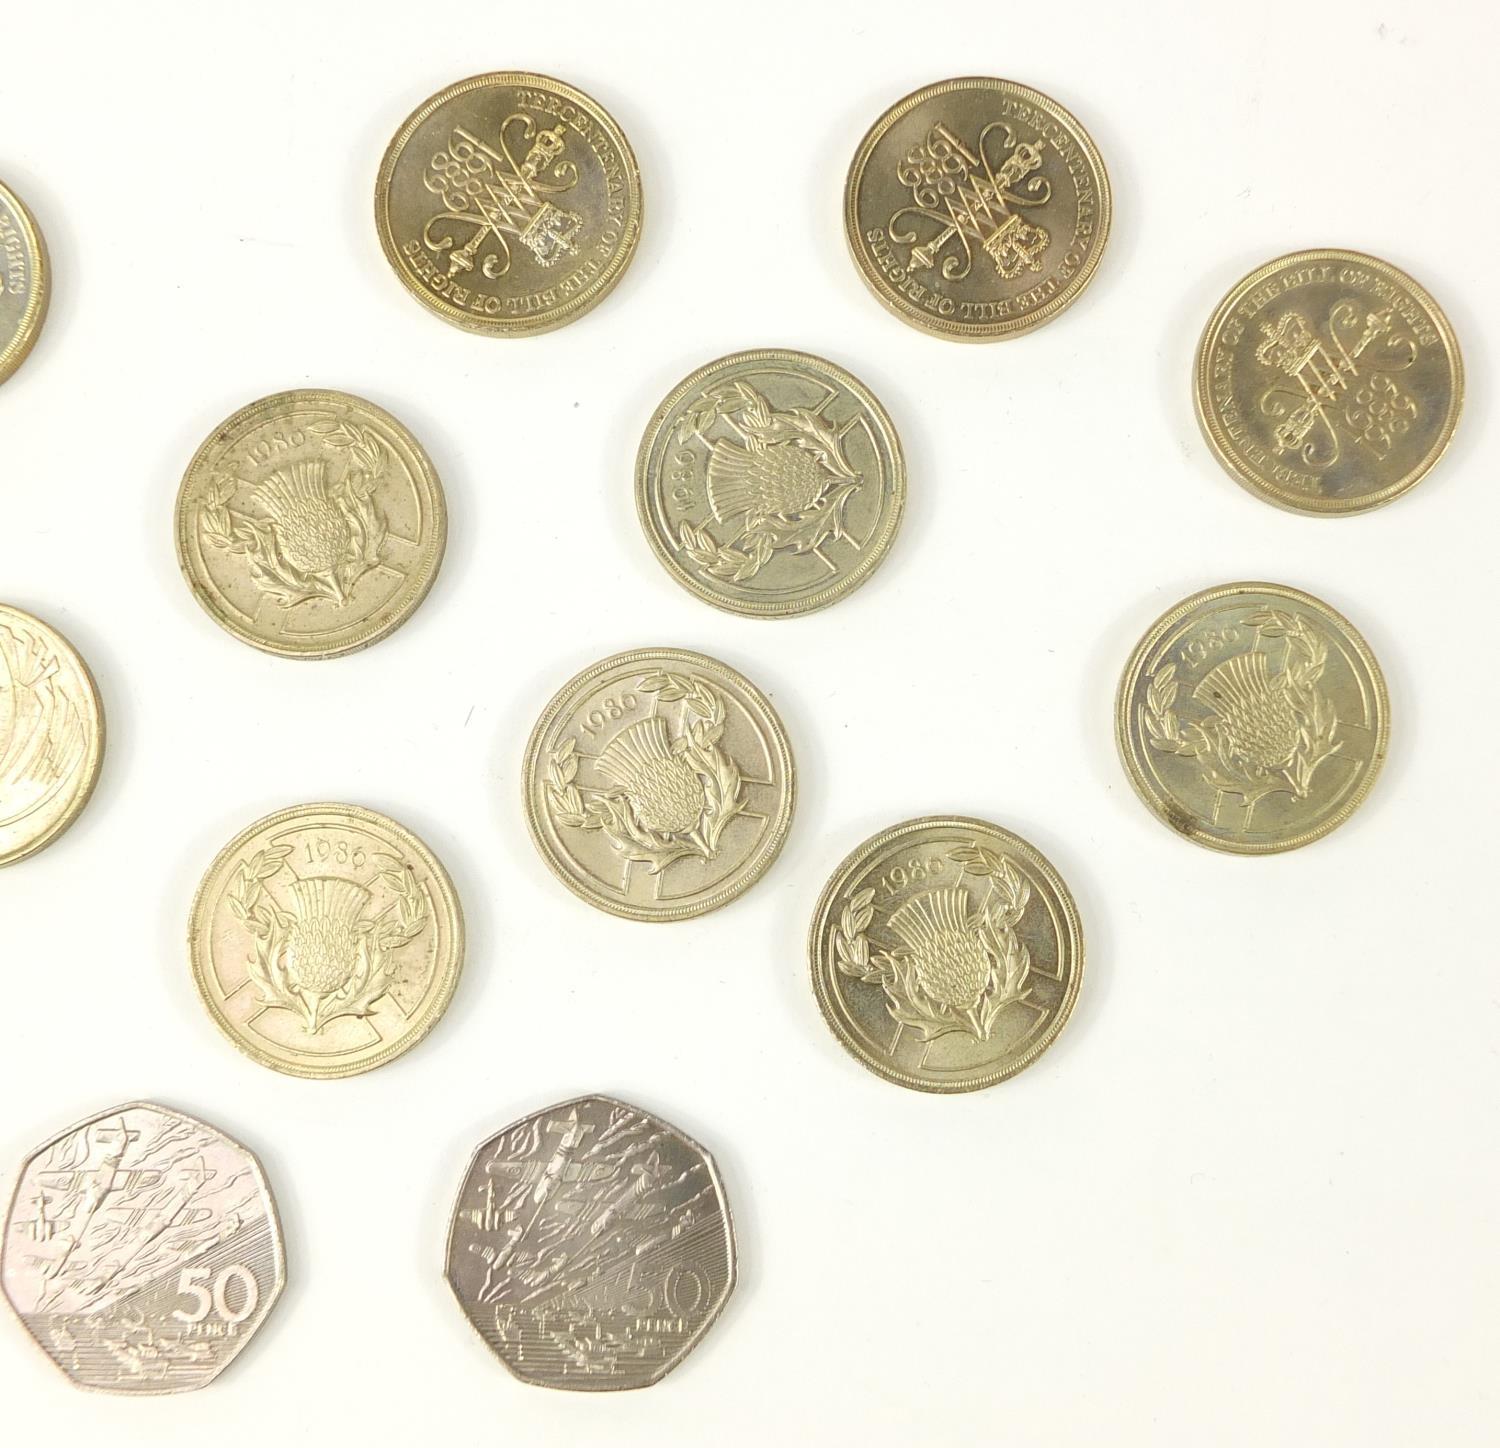 British coins and bank notes including five pounds, two pound coins, two fifty pence pieces and an - Image 7 of 8